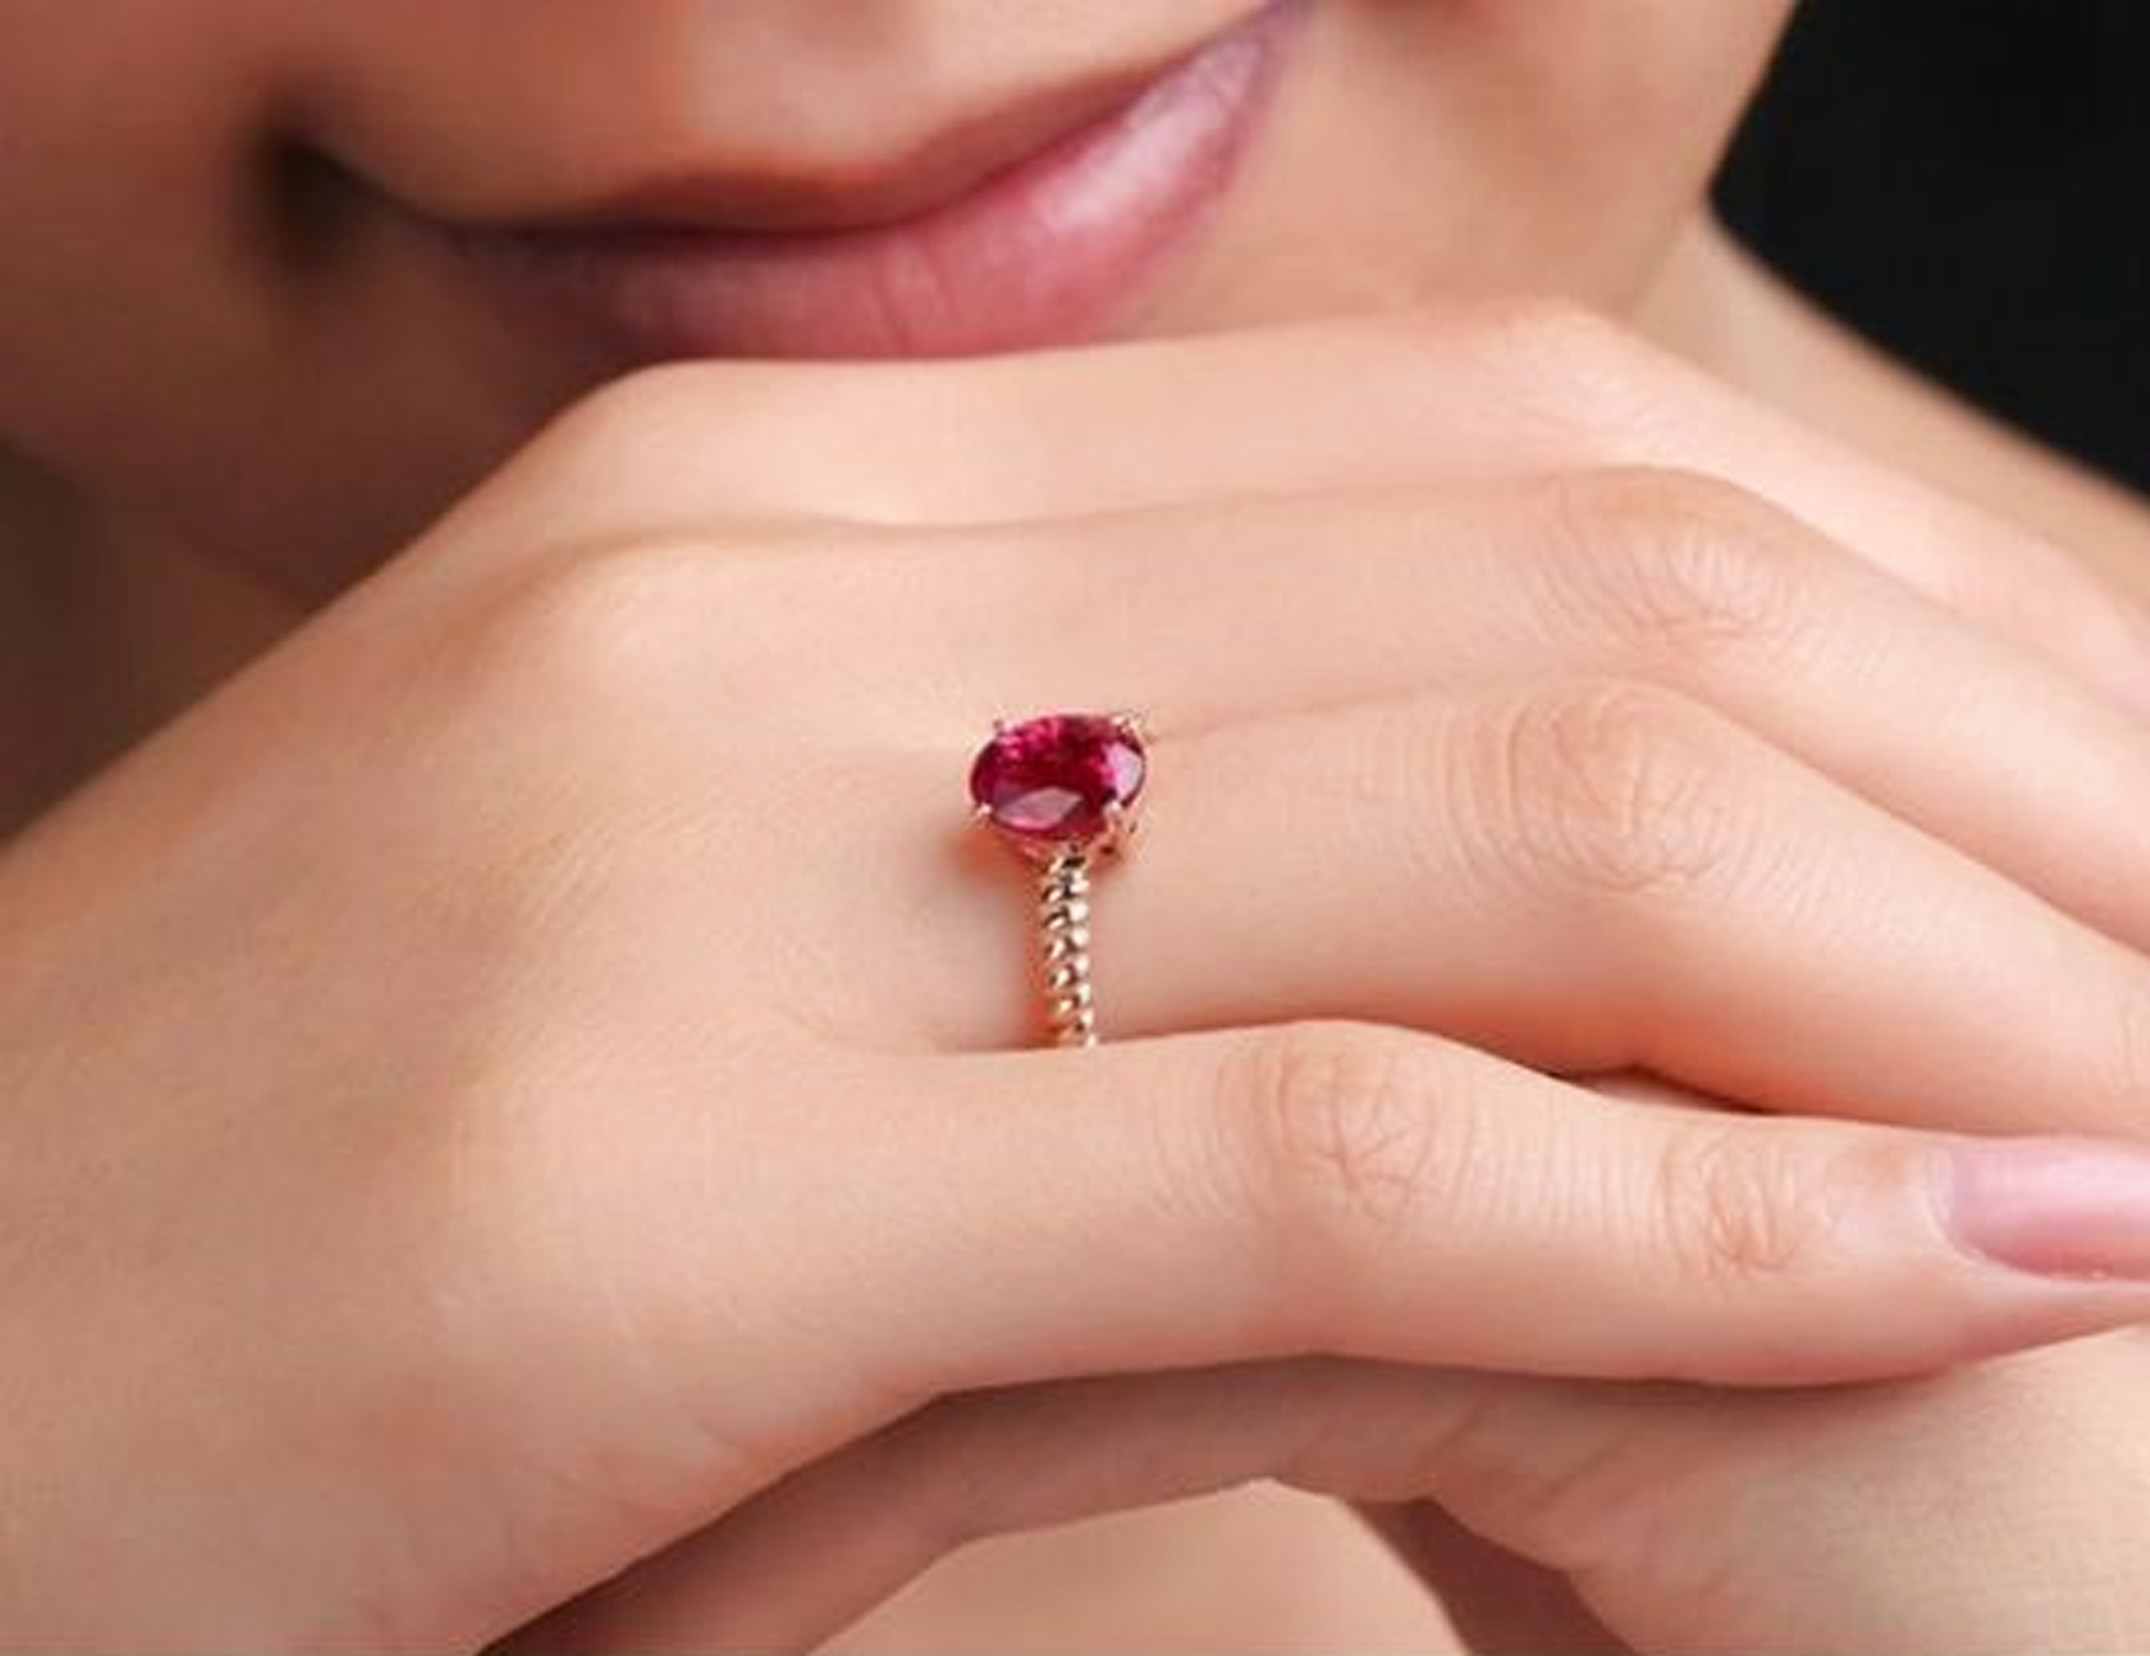 Top 5 Benefits of Wearing Ruby Stone Jewelry | Marriage